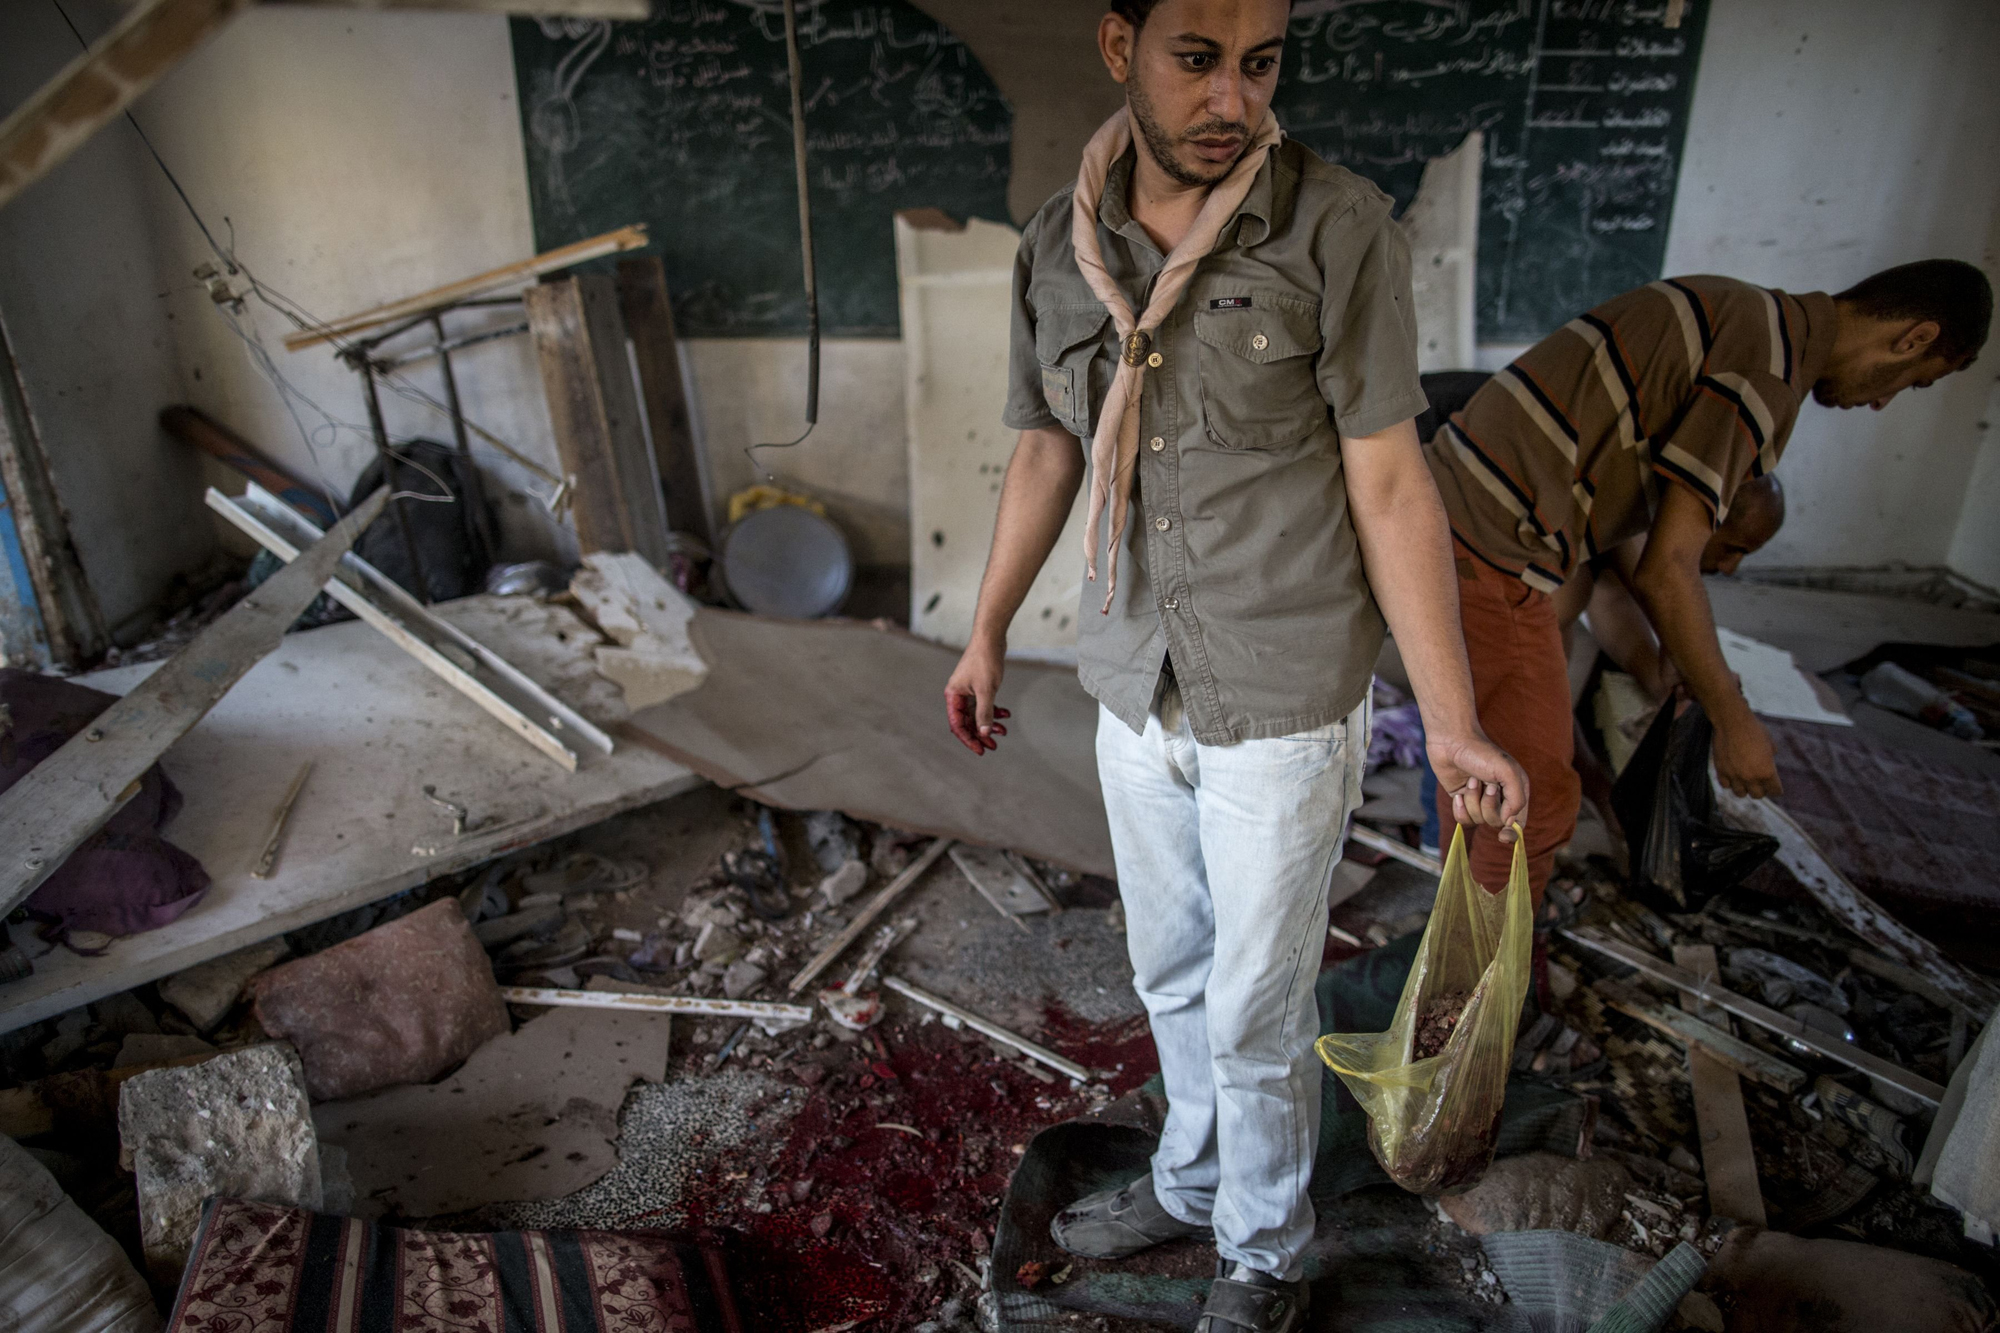 Palestinians collect human remains from a classroom inside a UN school in the Jabalia refugee camp after the area was hit by shelling on July 30, 2014.